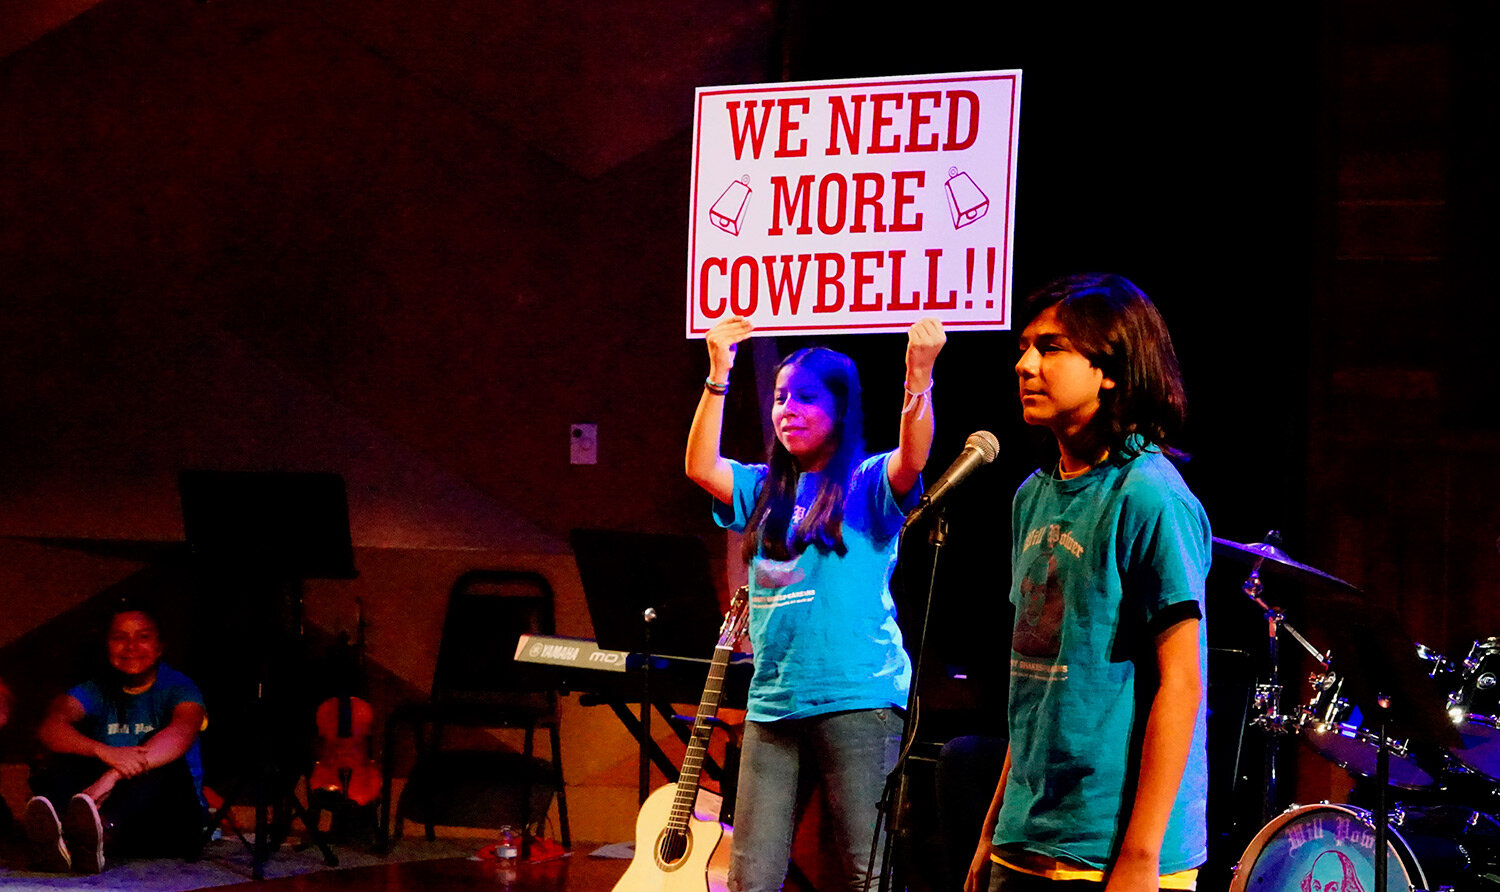  The Hobart Shakespeareans don't play by the rules: mixing Cowbells and Hamlet! 